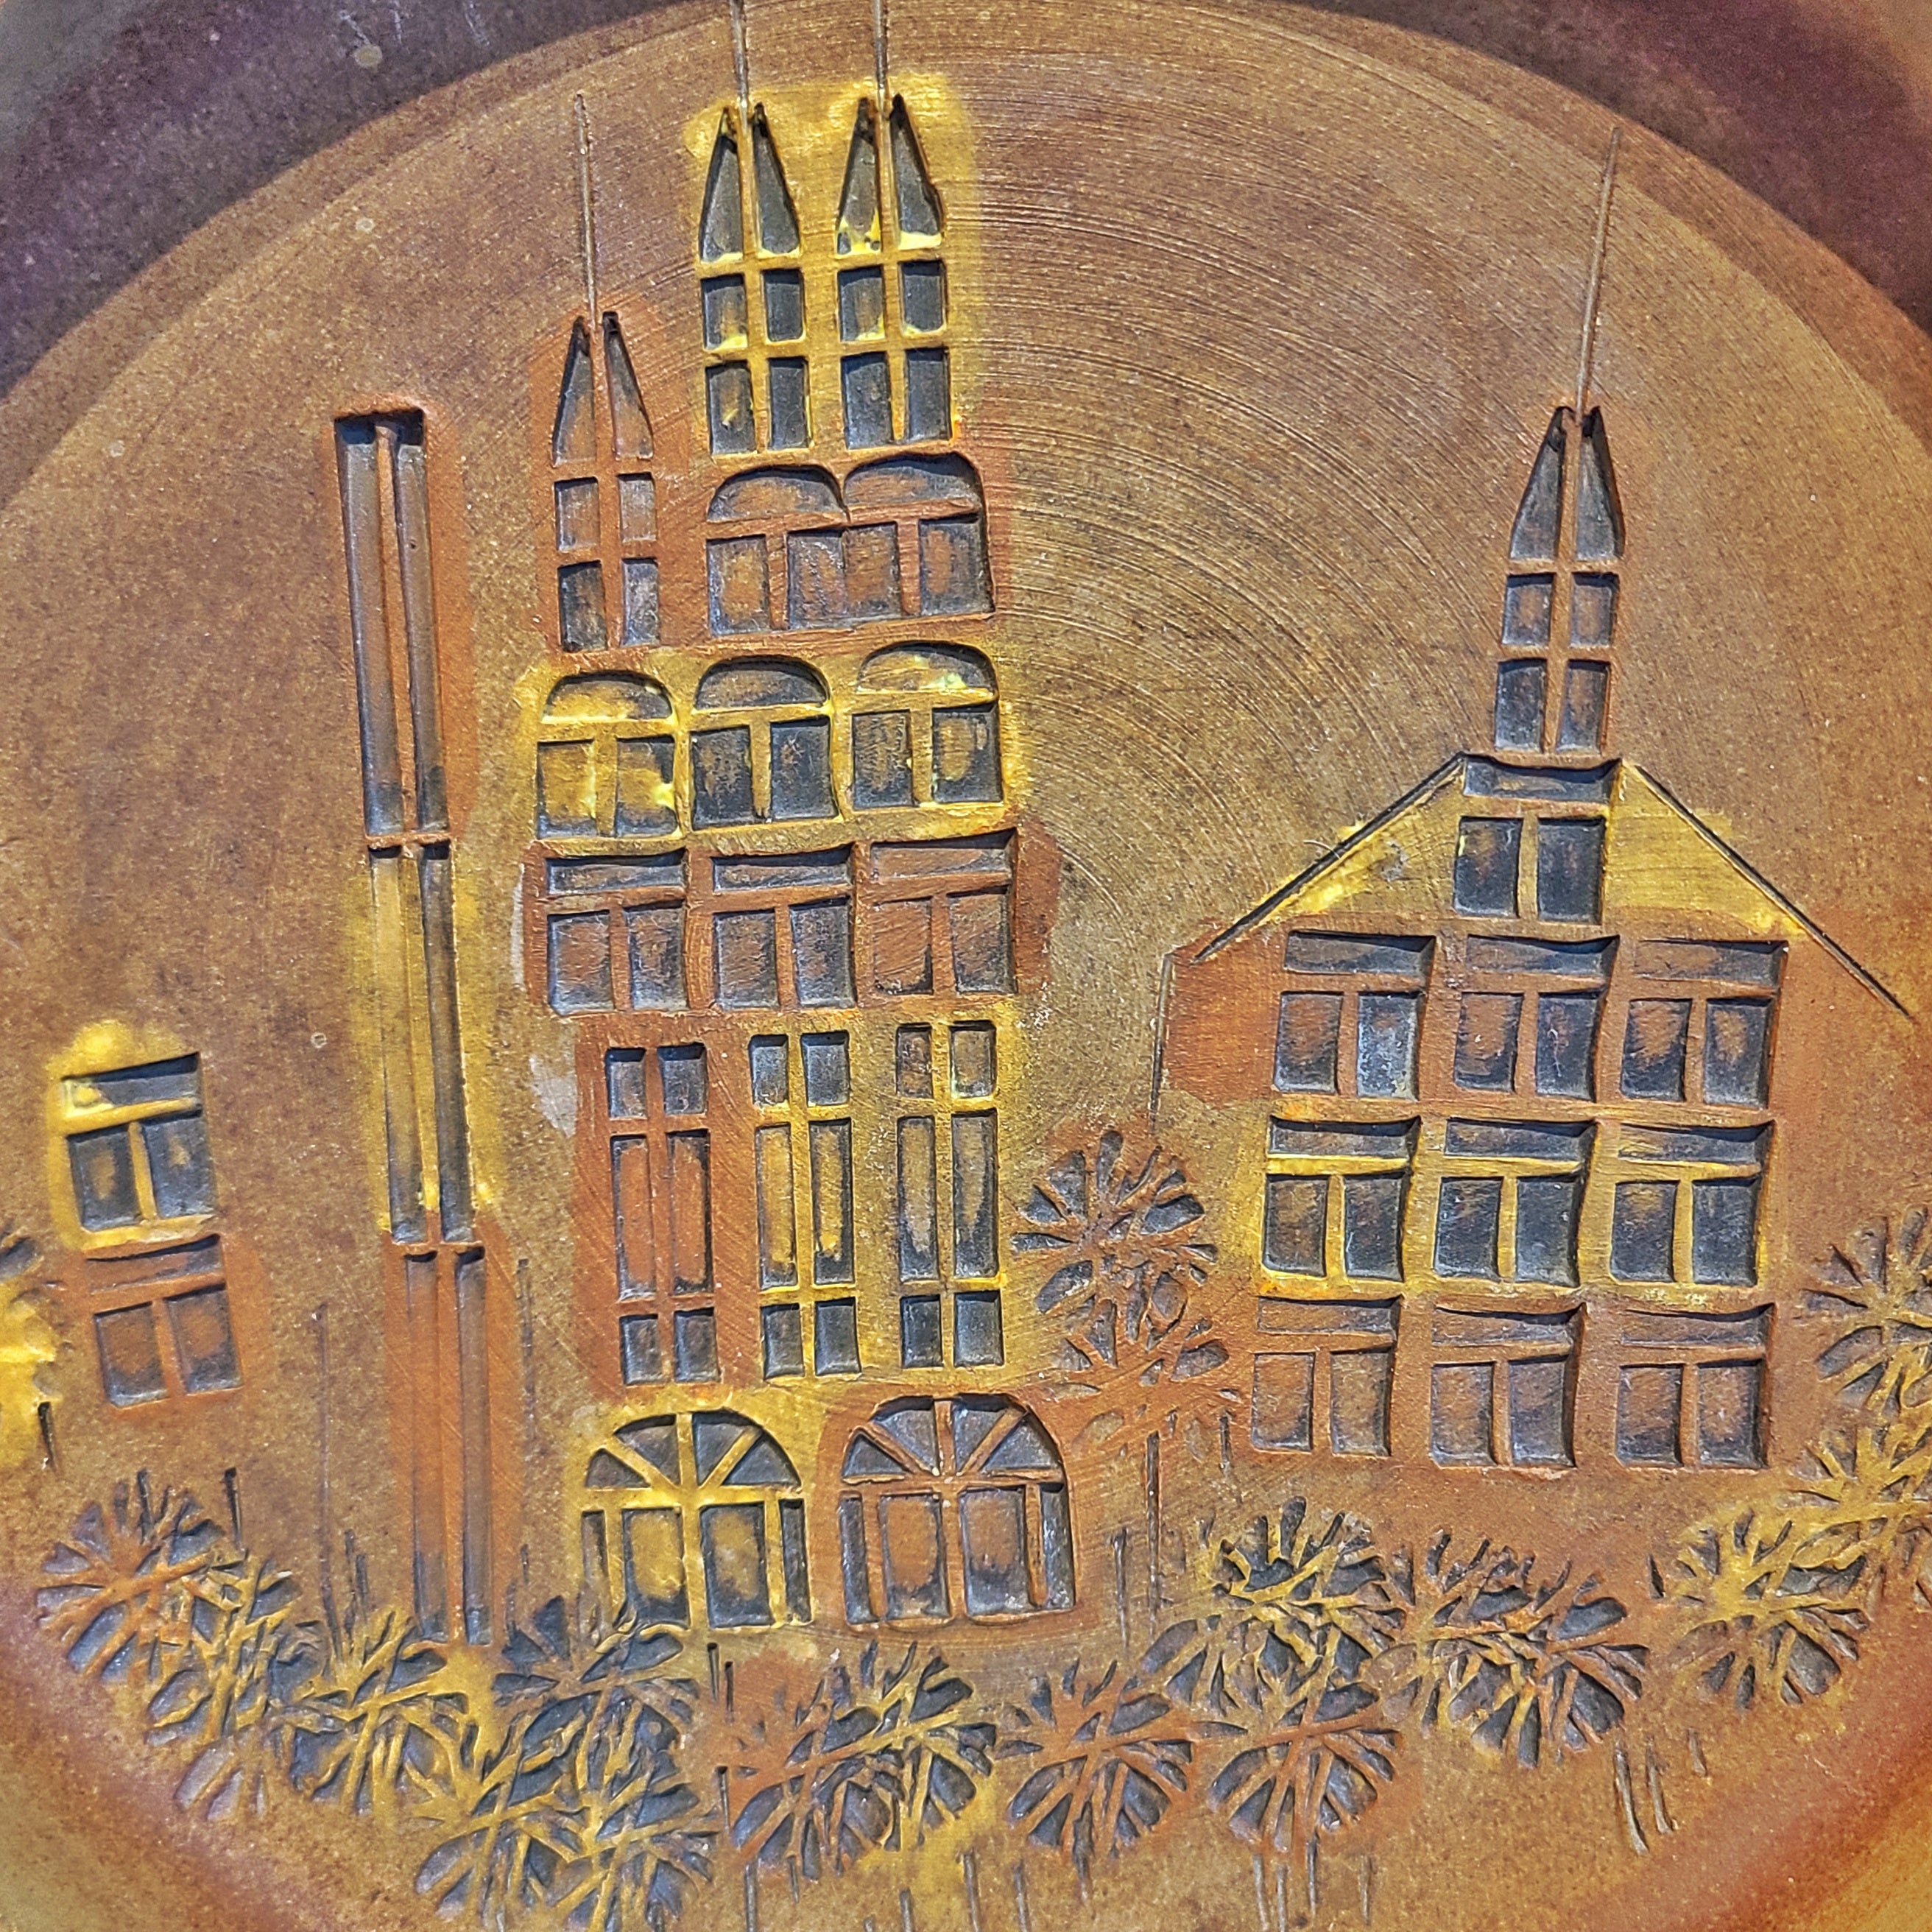 LARGE BITOSSI ‘CAMPUS’ DÉCOR ASHTRAY (NEVER USED)